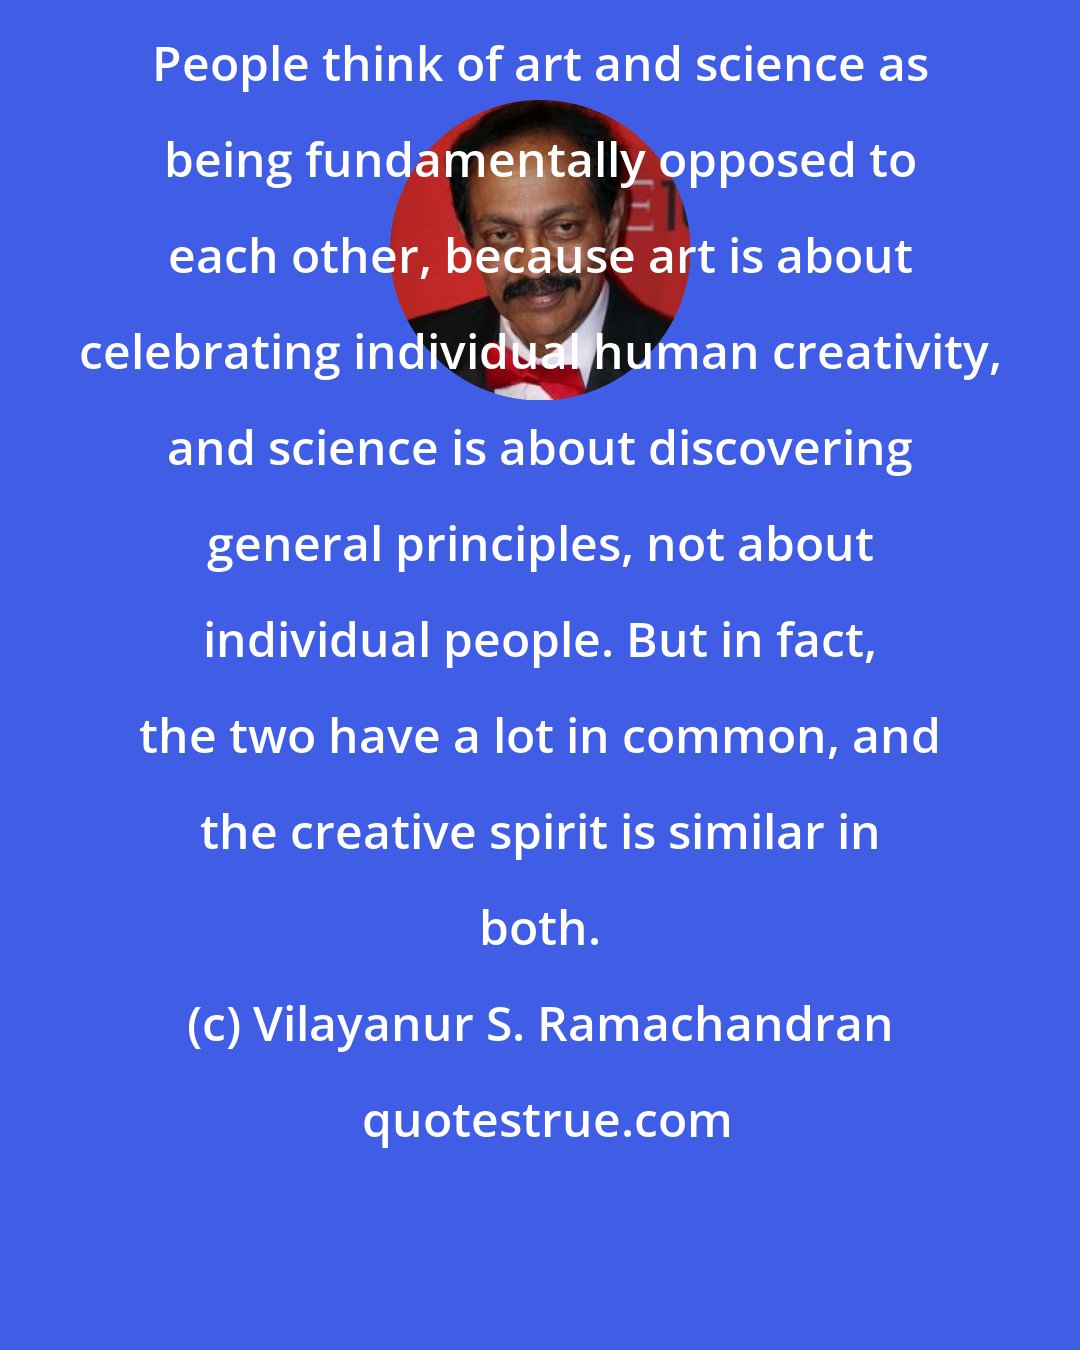 Vilayanur S. Ramachandran: People think of art and science as being fundamentally opposed to each other, because art is about celebrating individual human creativity, and science is about discovering general principles, not about individual people. But in fact, the two have a lot in common, and the creative spirit is similar in both.